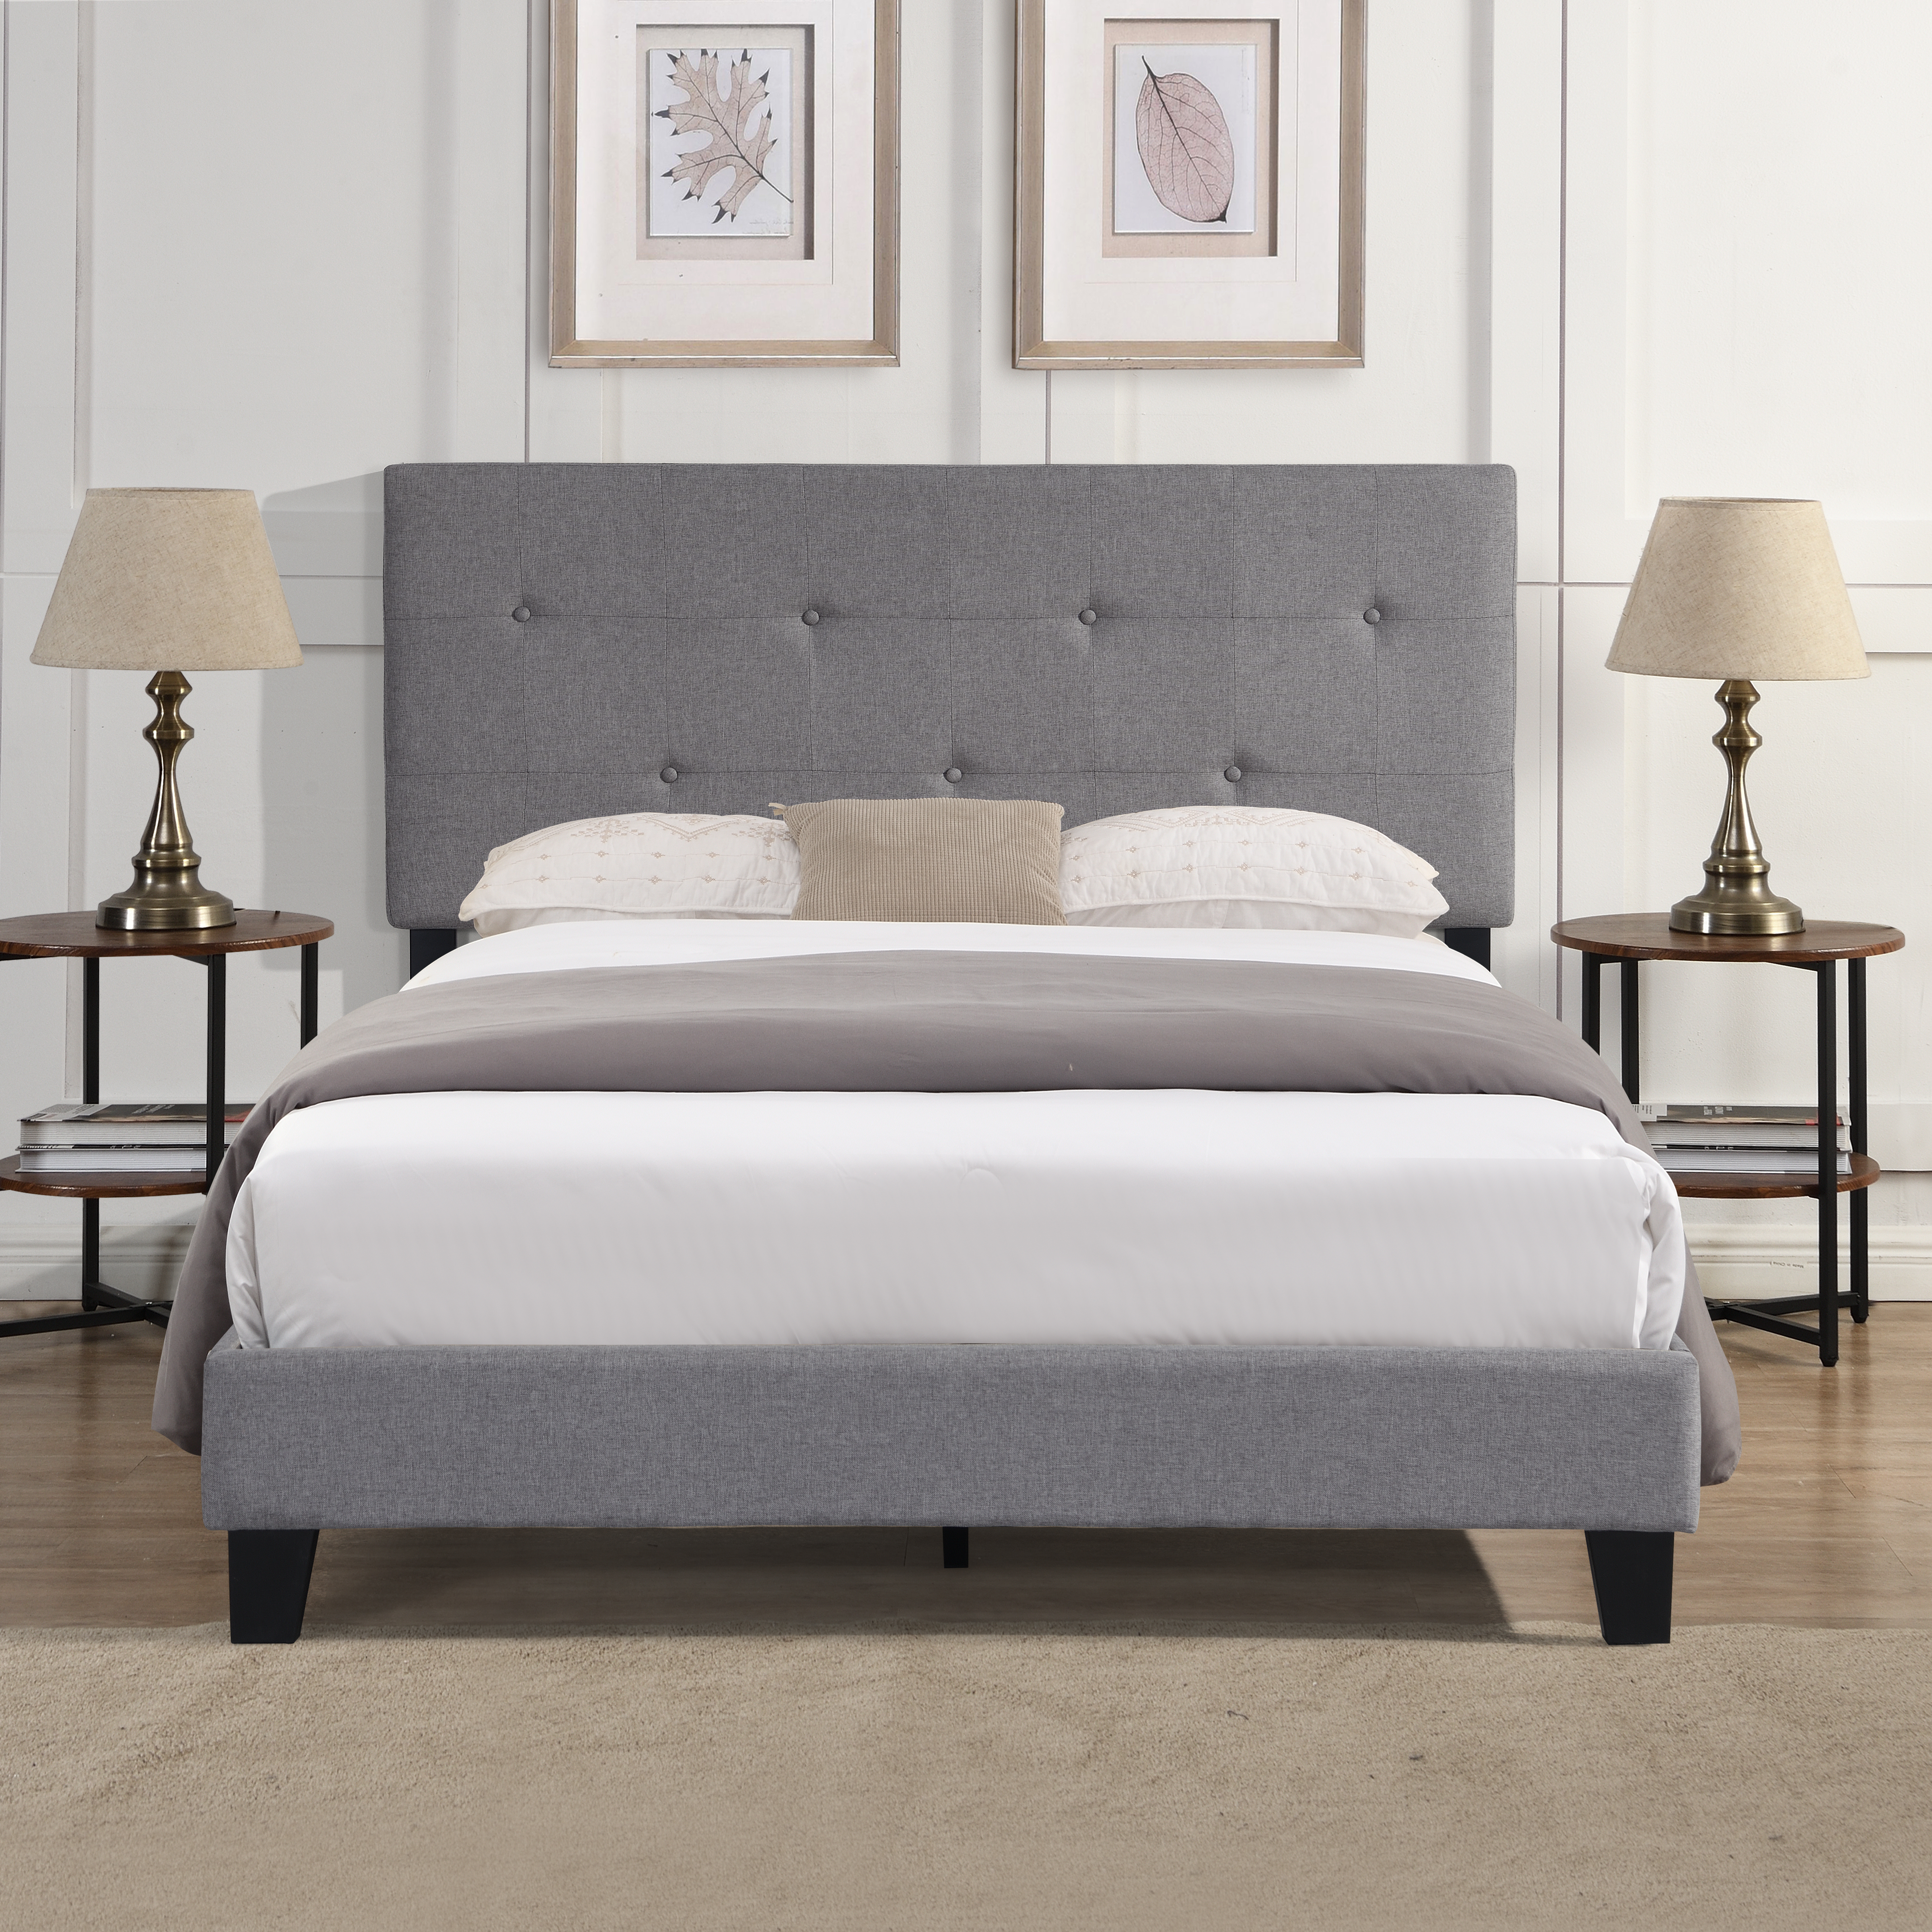 Queen Size Upholstered Platform Bed Frame with Button Tufted Linen Fabric Headboard, No Box Spring Needed, Wood Slat Support, Easy Assembly,  Gray-CASAINC